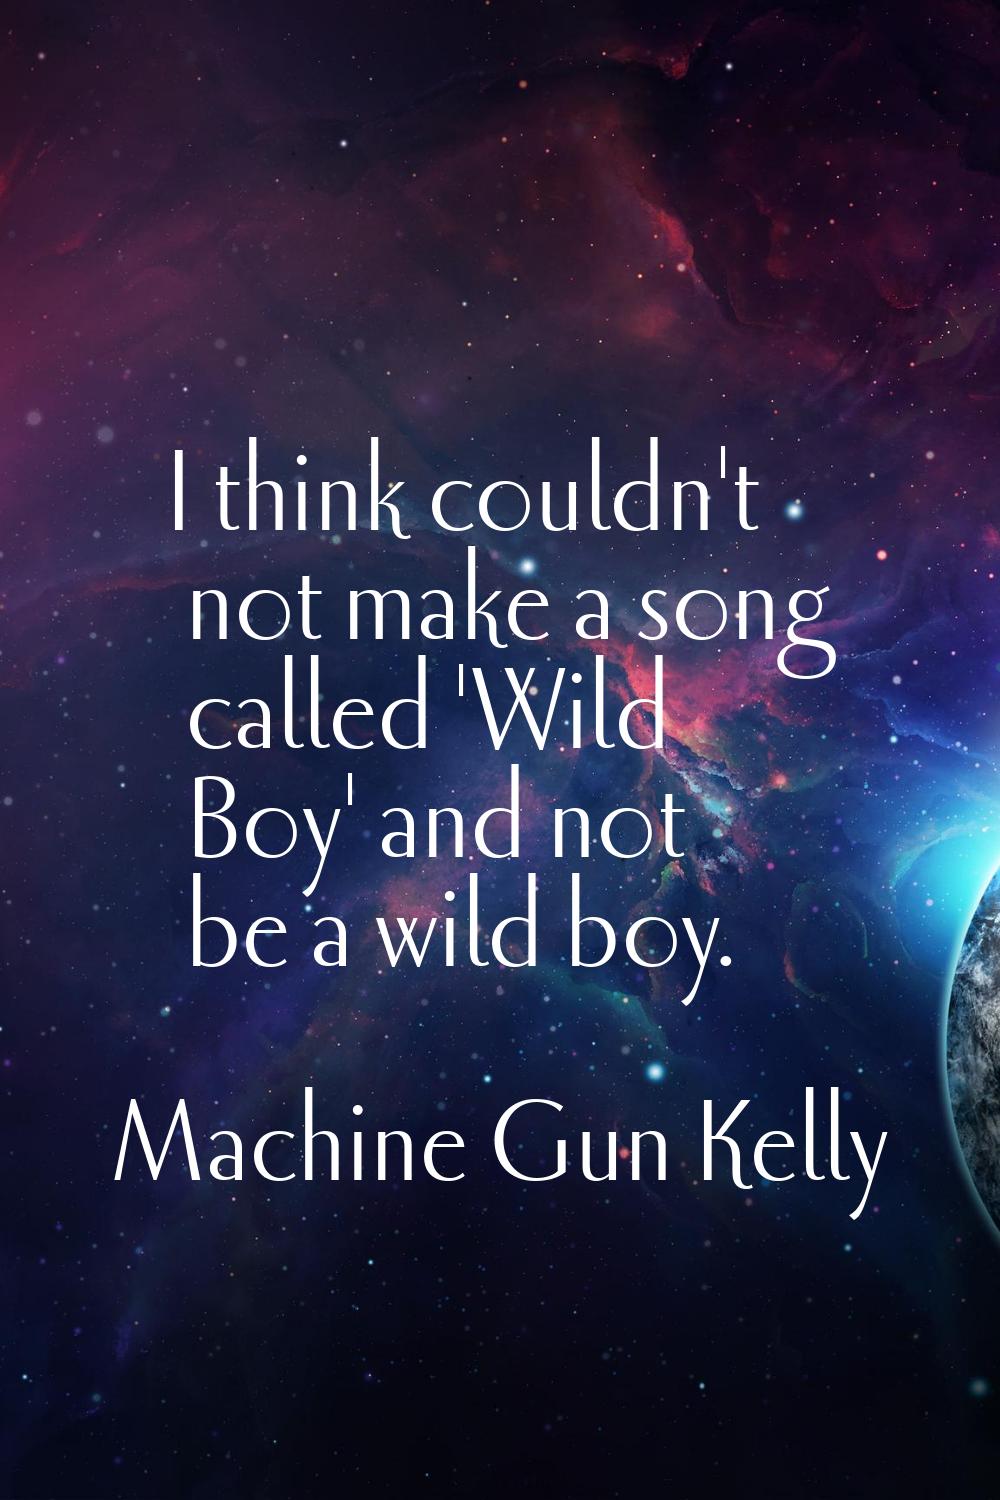 I think couldn't not make a song called 'Wild Boy' and not be a wild boy.